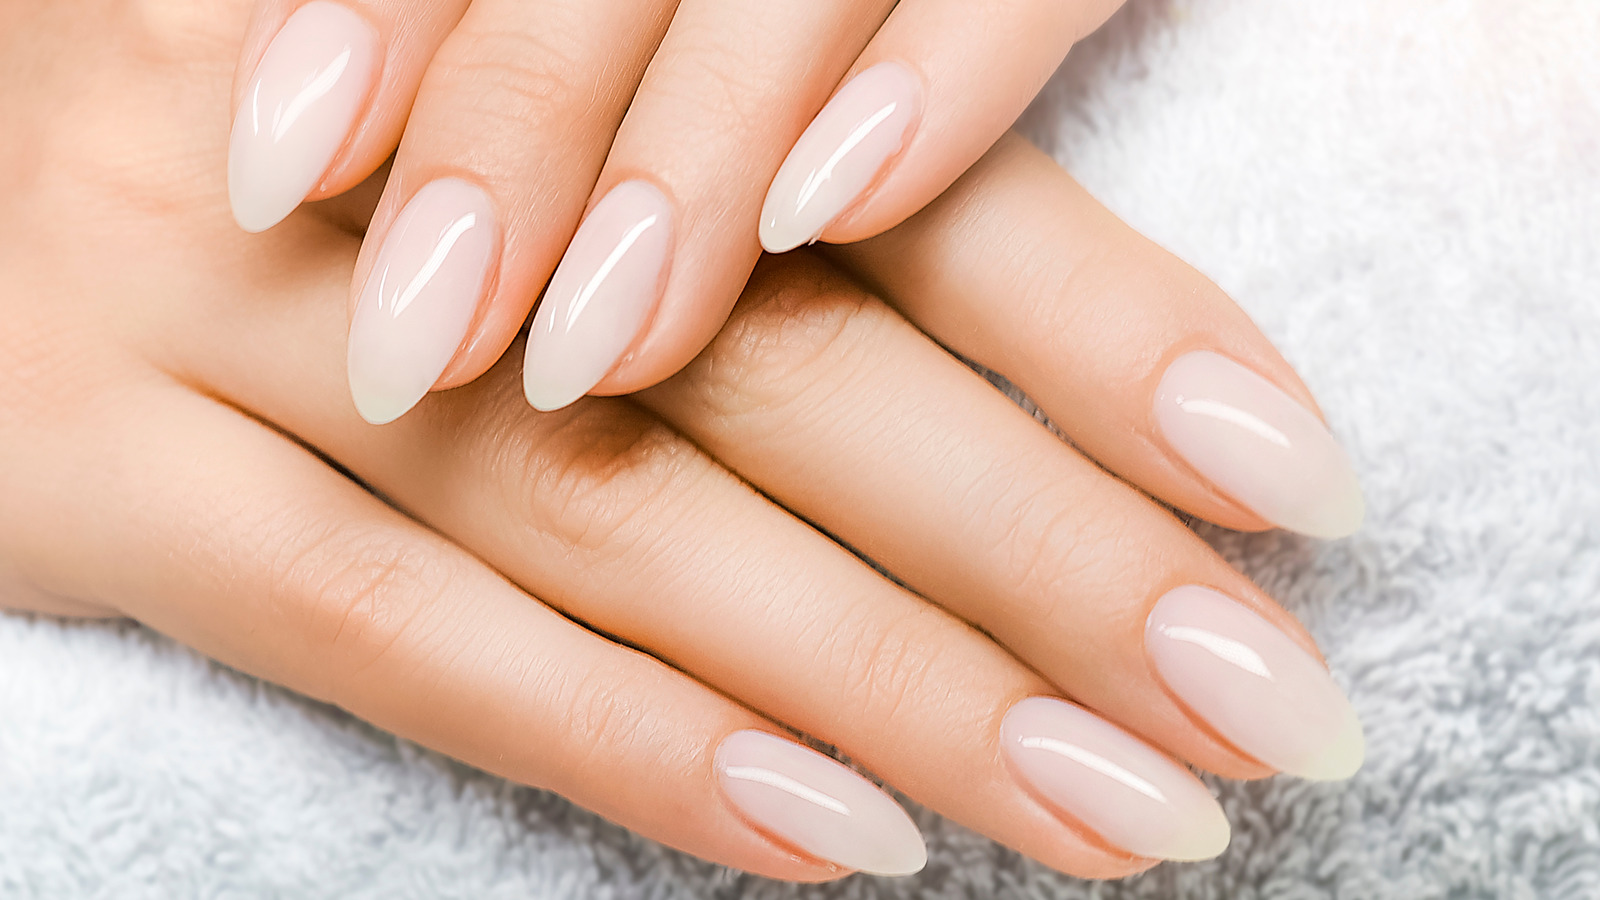 Nail Polish Colors For The Perfect Minimalist Manicure